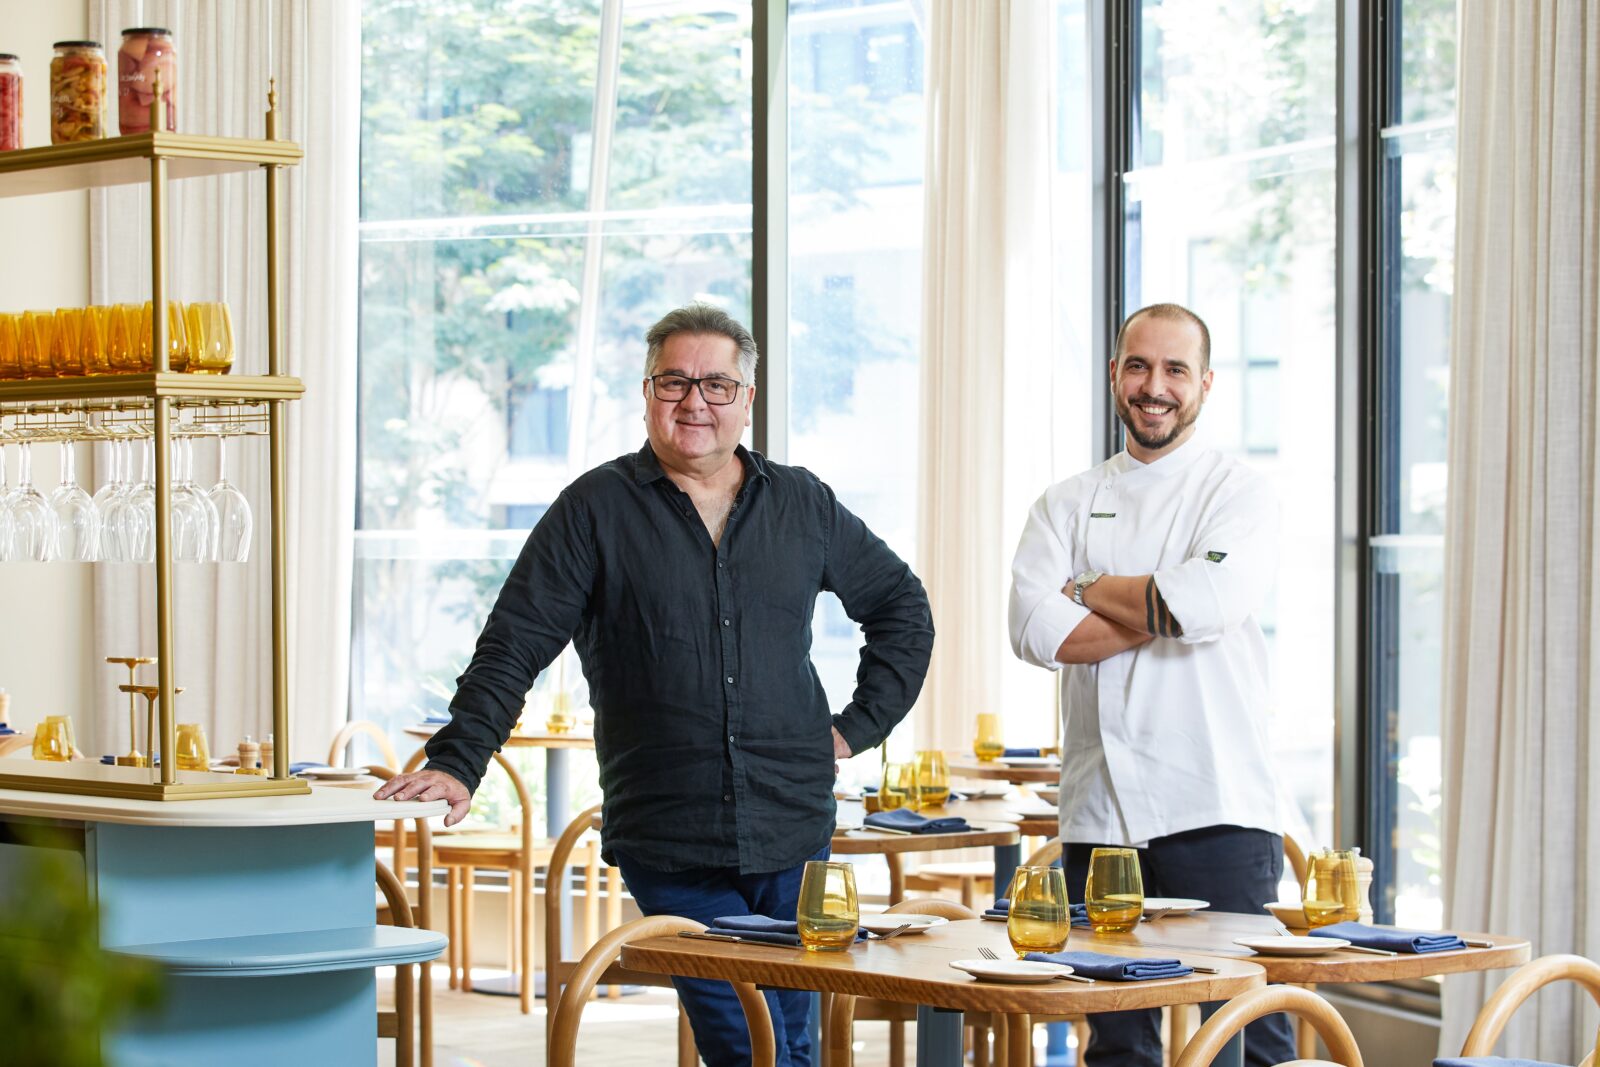 Celebrity chef & head chef both standing together in Settimo